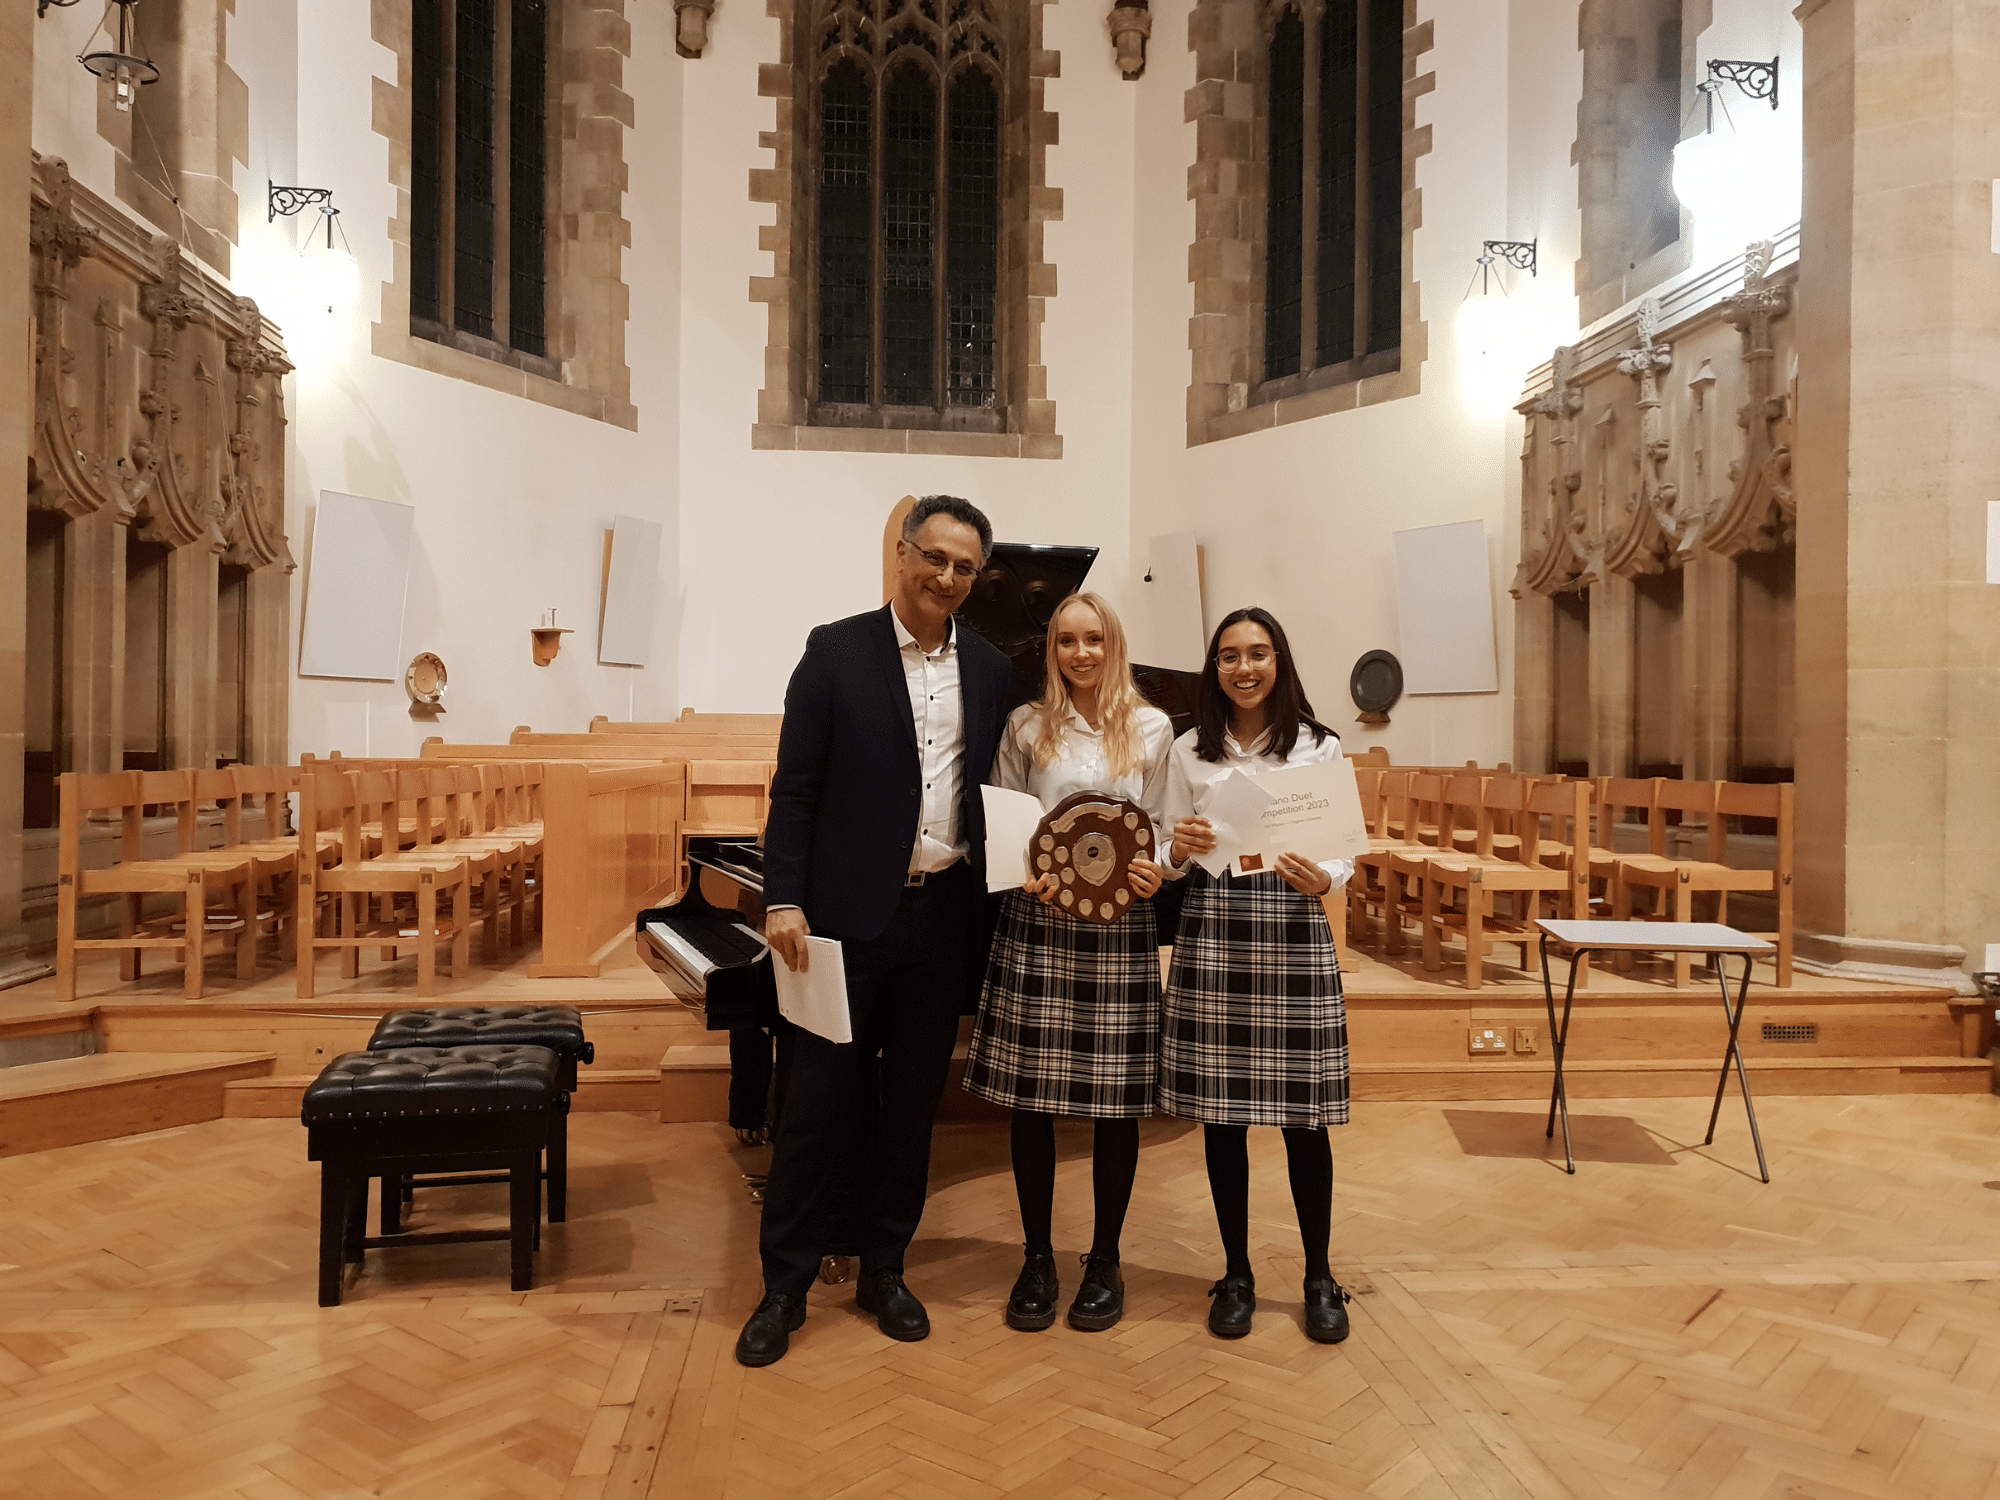 Two students smile with certificates and a shield after winning piano competition